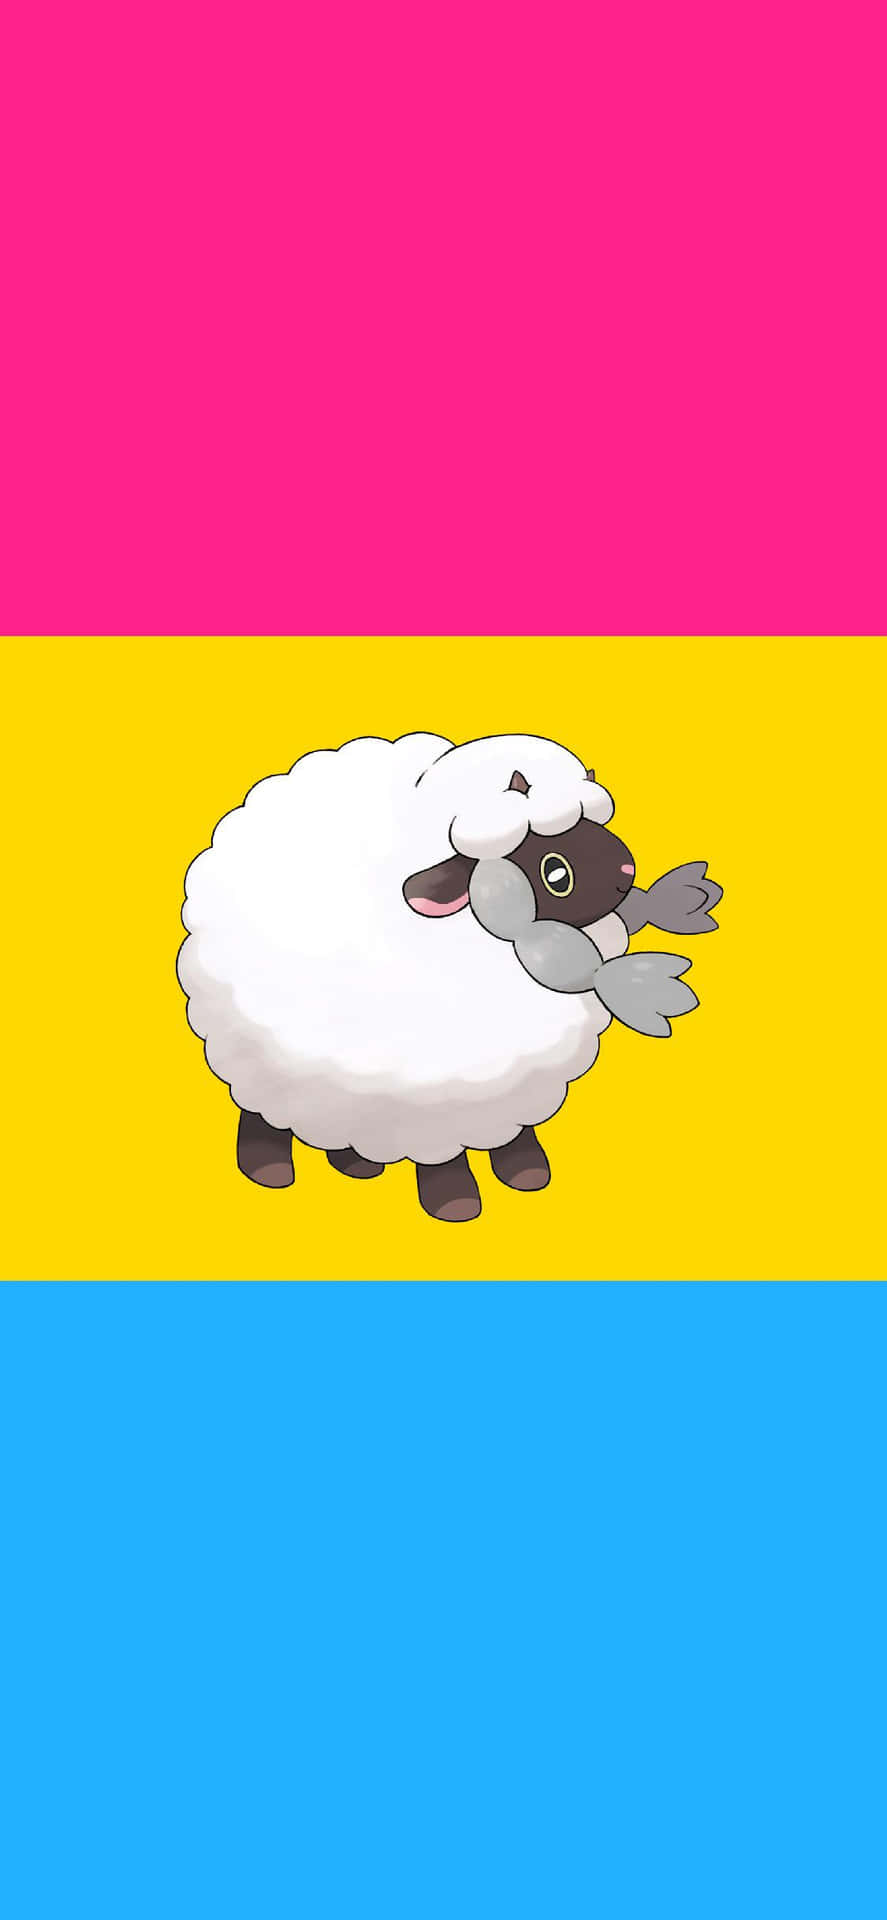 Pokémon Character Wooloo With Pan Flag Wallpaper